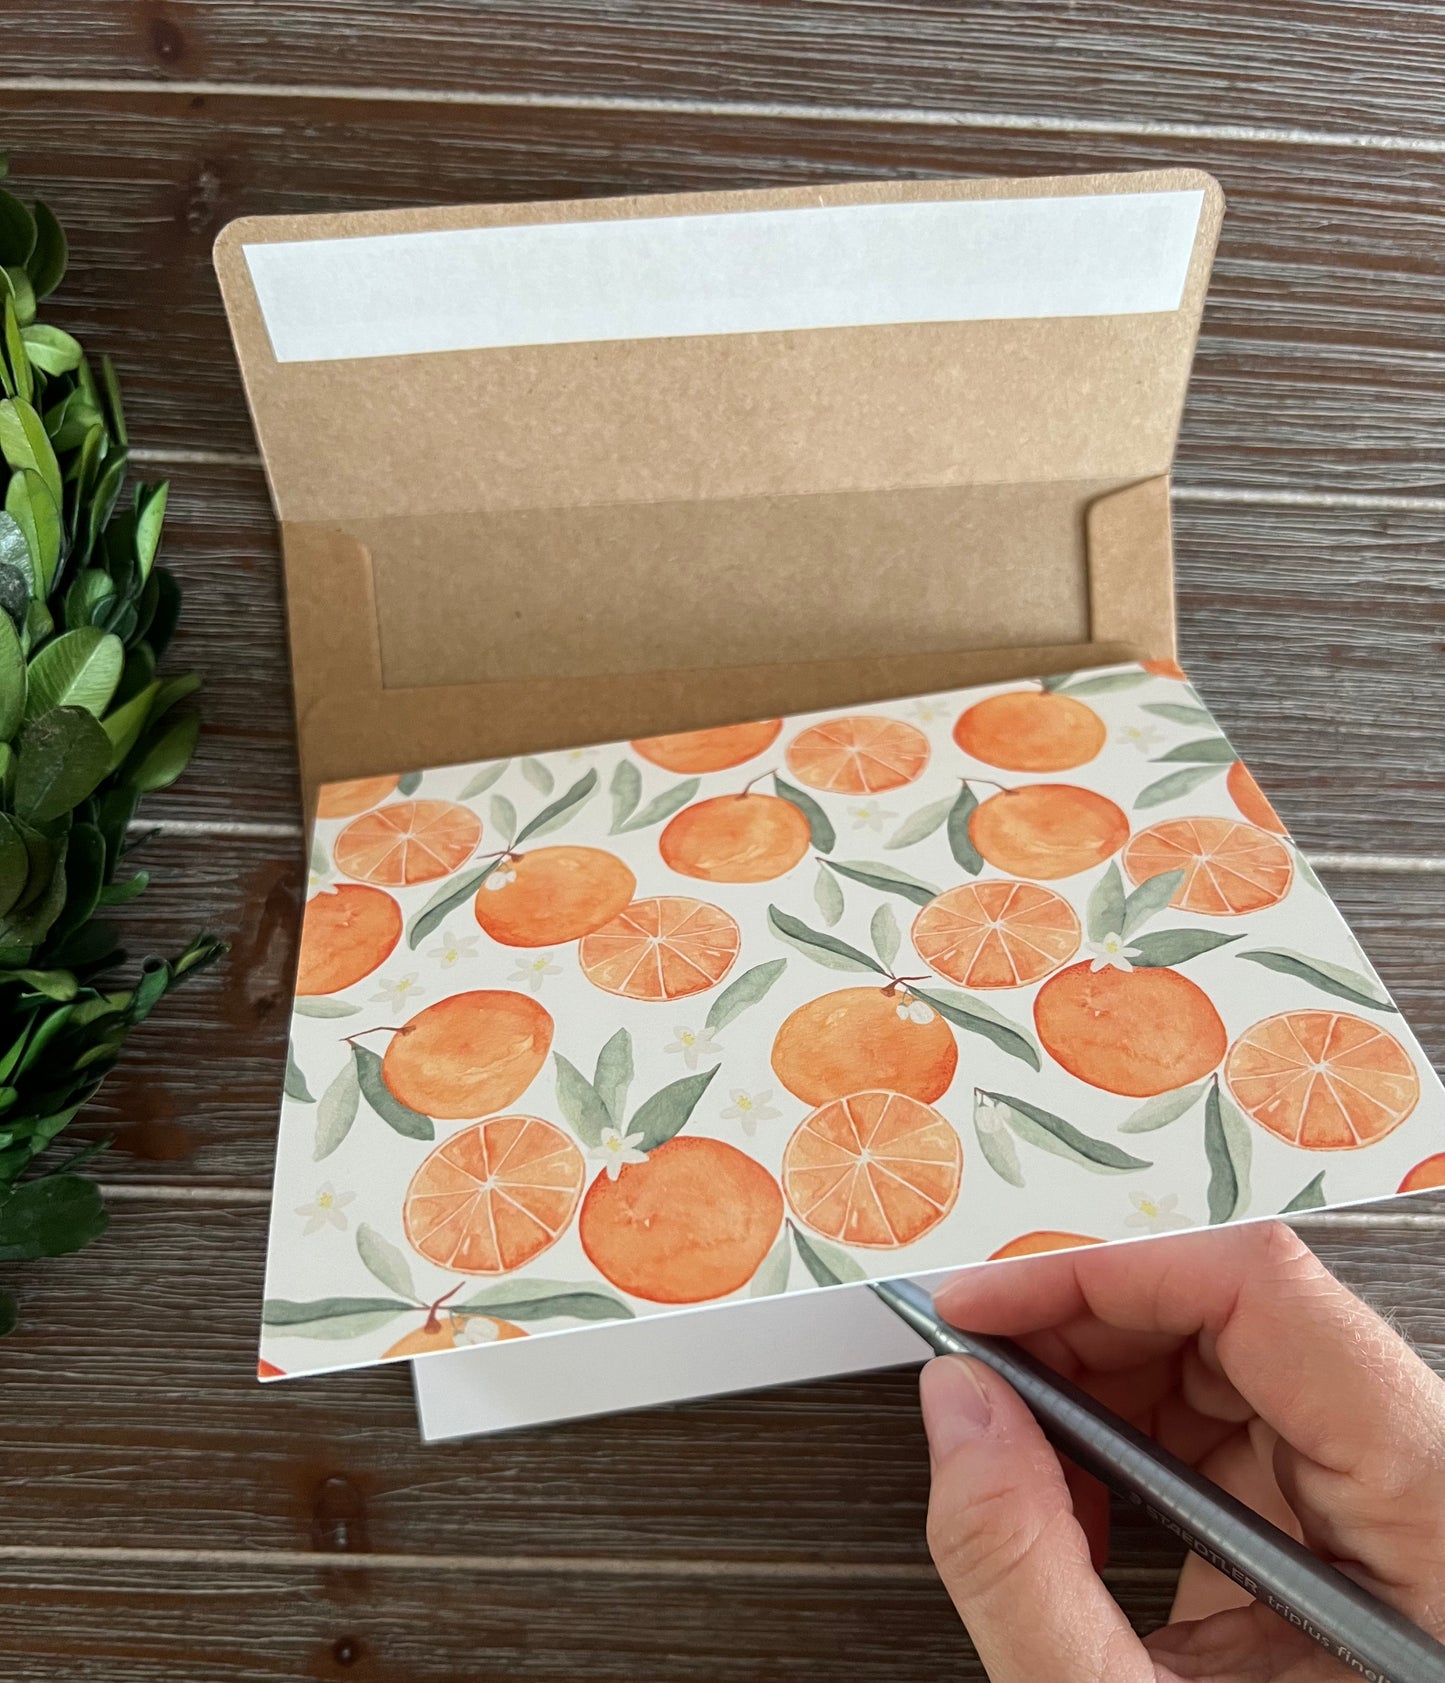 Oranges Stationery Set, Thank You Note Cards